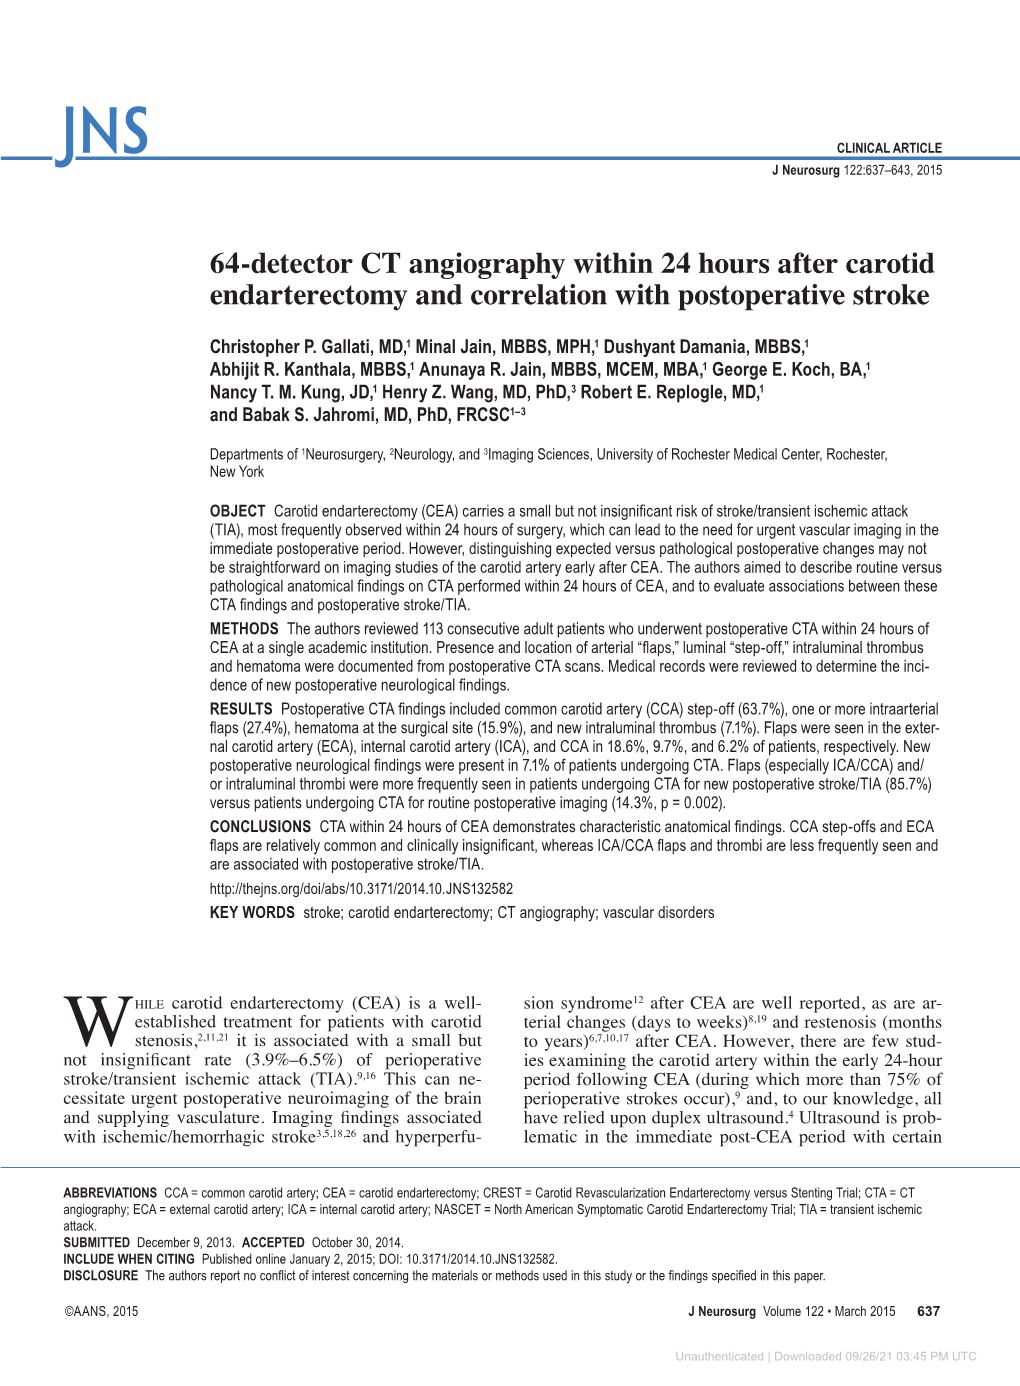 64-Detector CT Angiography Within 24 Hours After Carotid Endarterectomy and Correlation with Postoperative Stroke